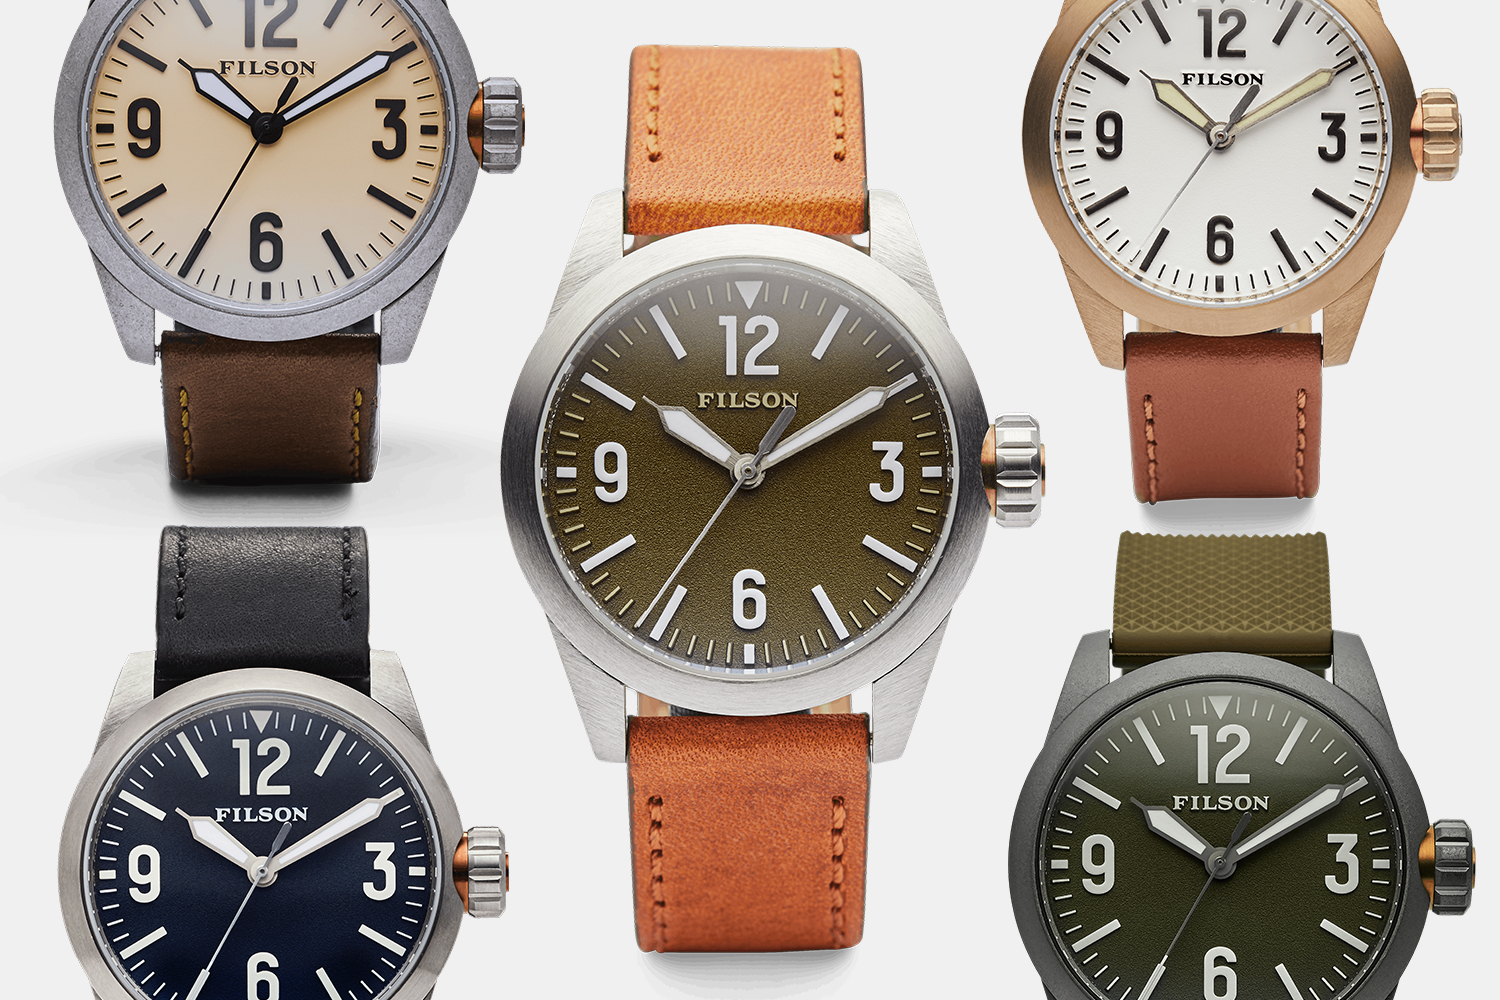 Filson Field Watches Are 150 Off During the Winter Sale InsideHook